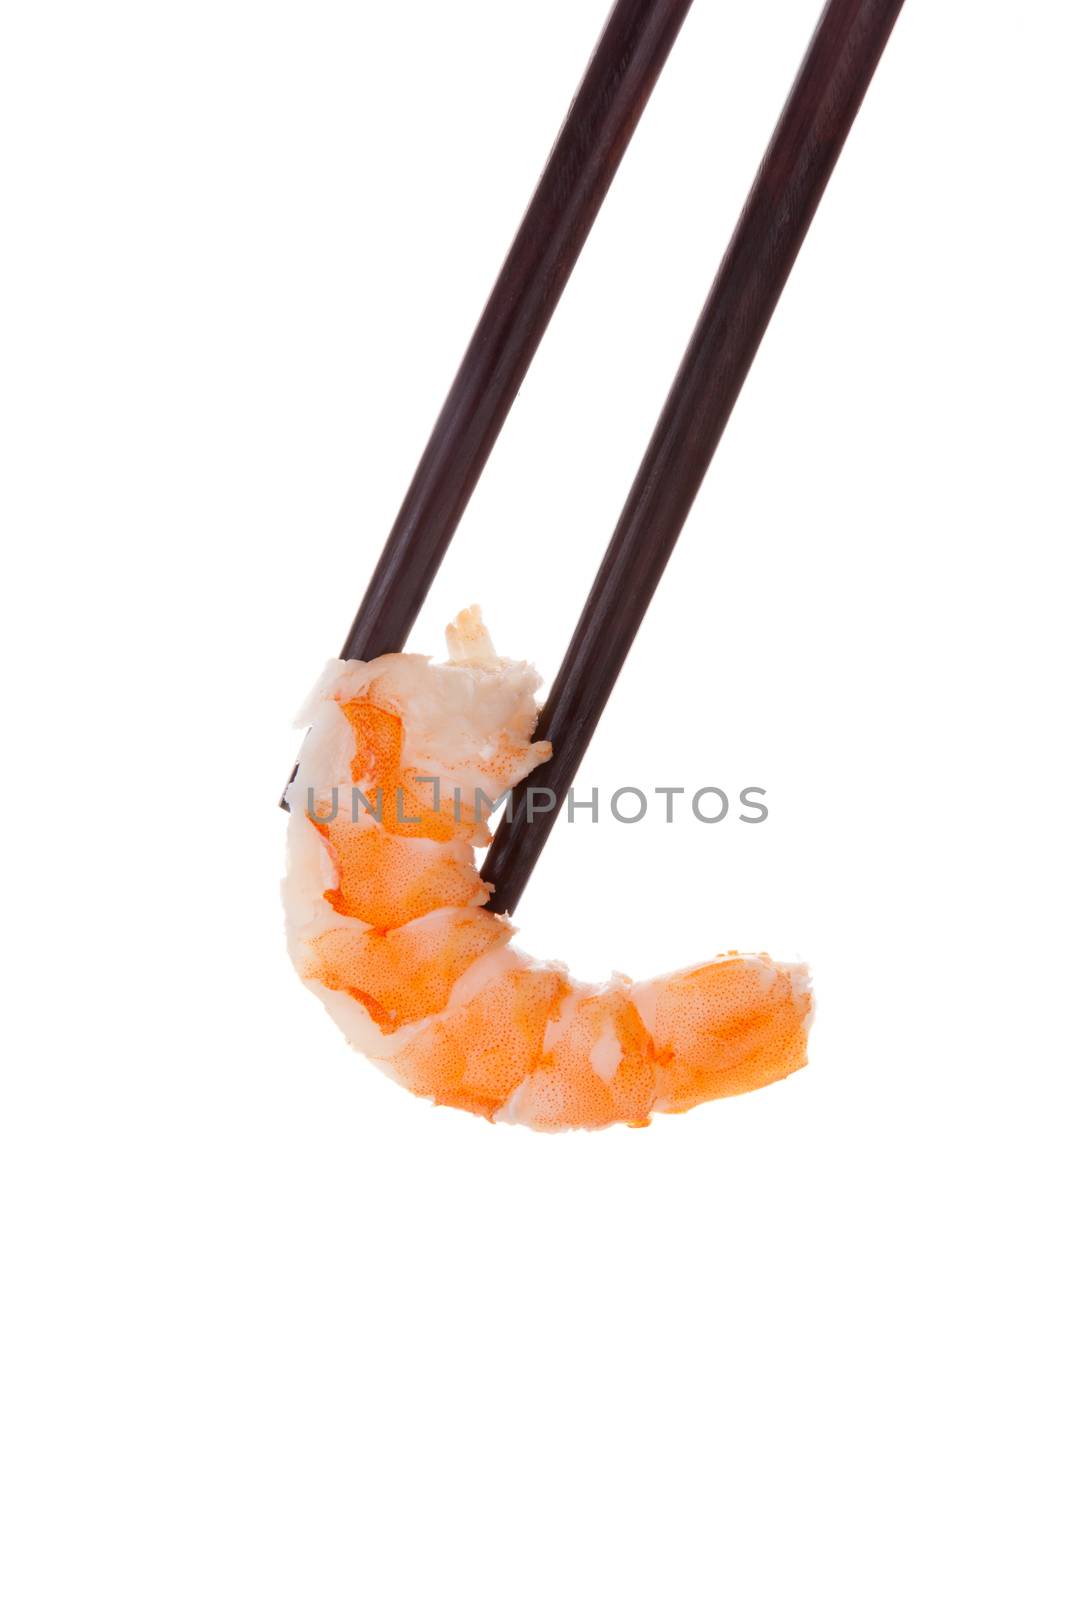 Shrimp in chopsticks isolated on white background. Culinary healthy seafood eating. 